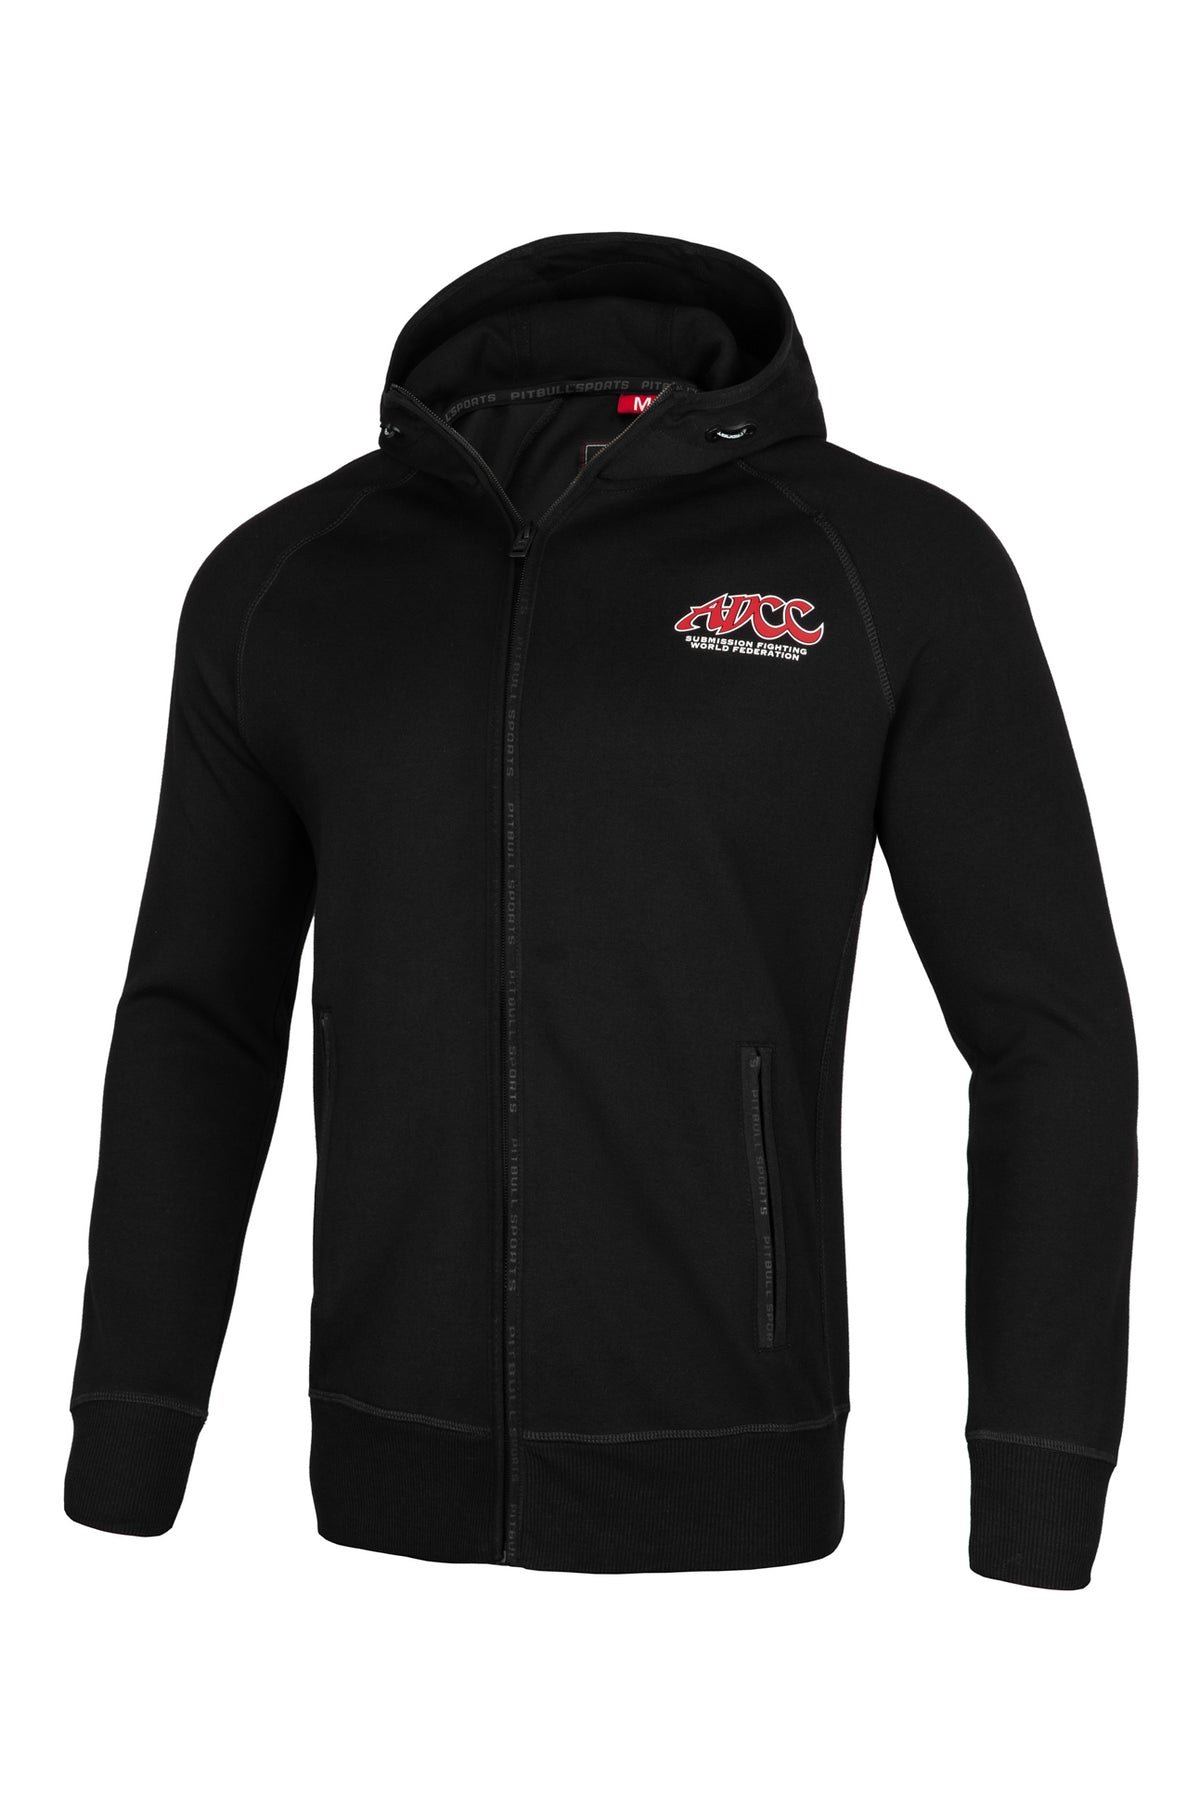 ADCC Black Hooded Zip.